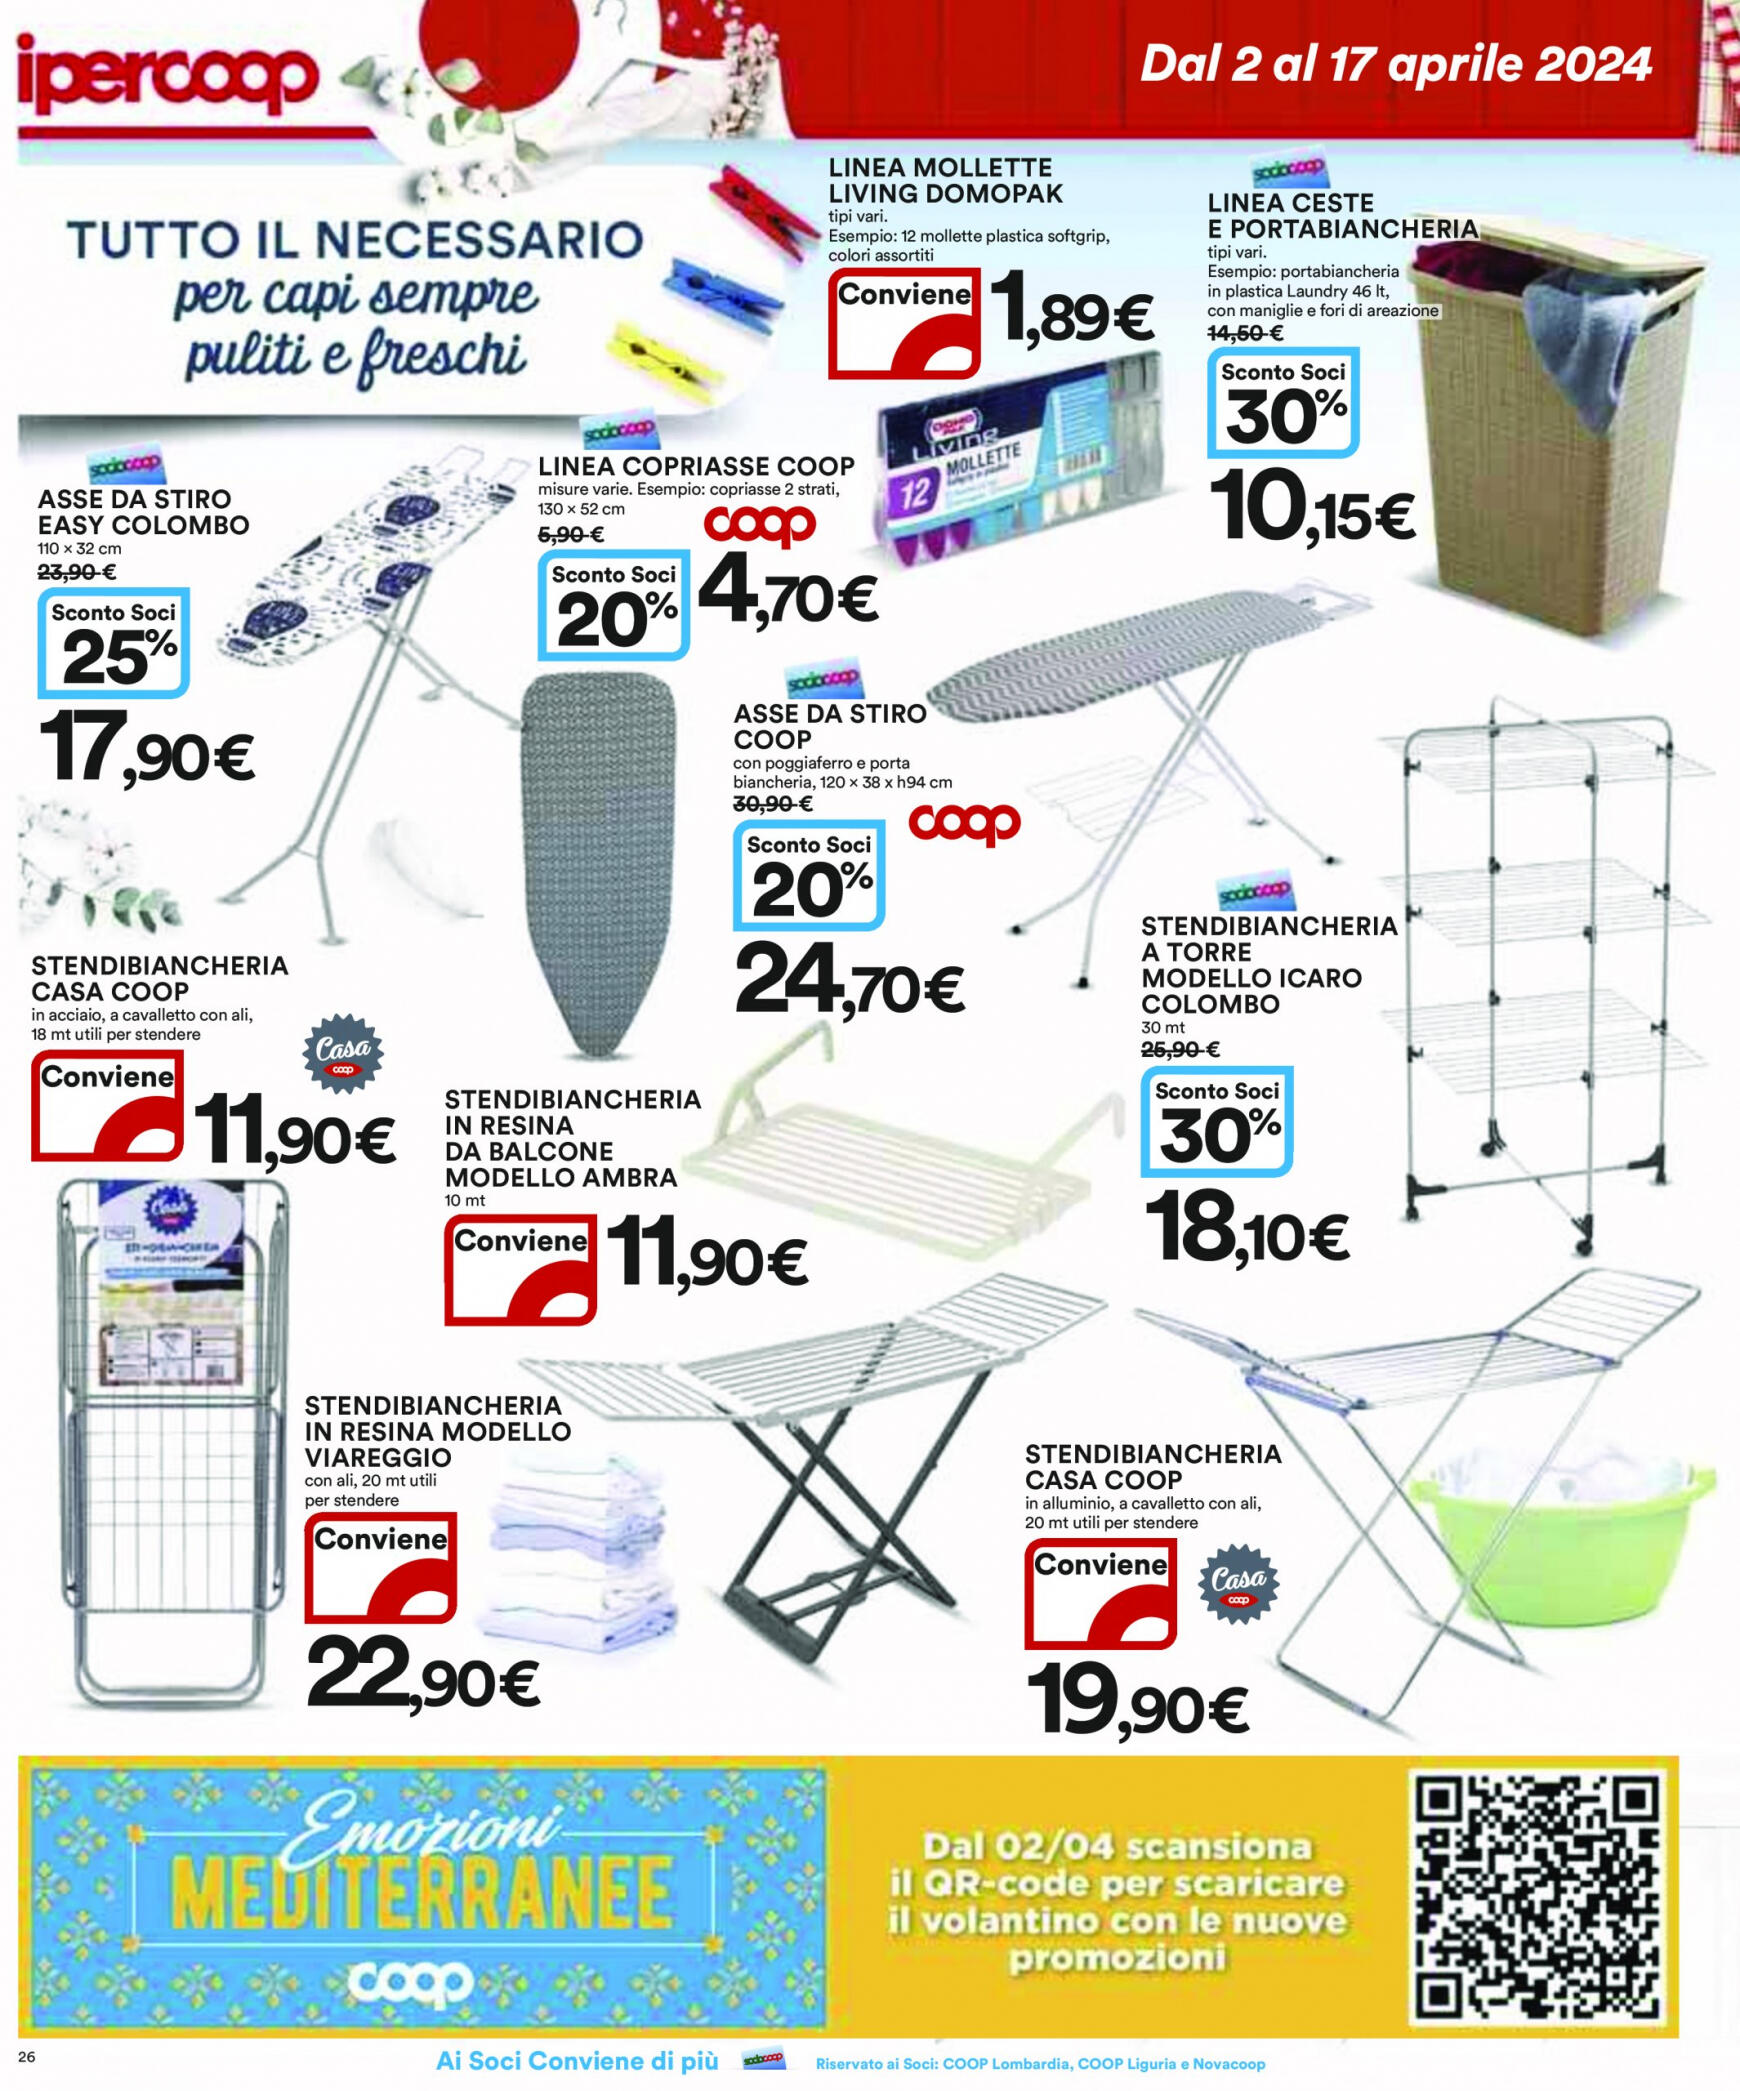 coop - Nuovo volantino Coop 02.04. - 17.04. - page: 26